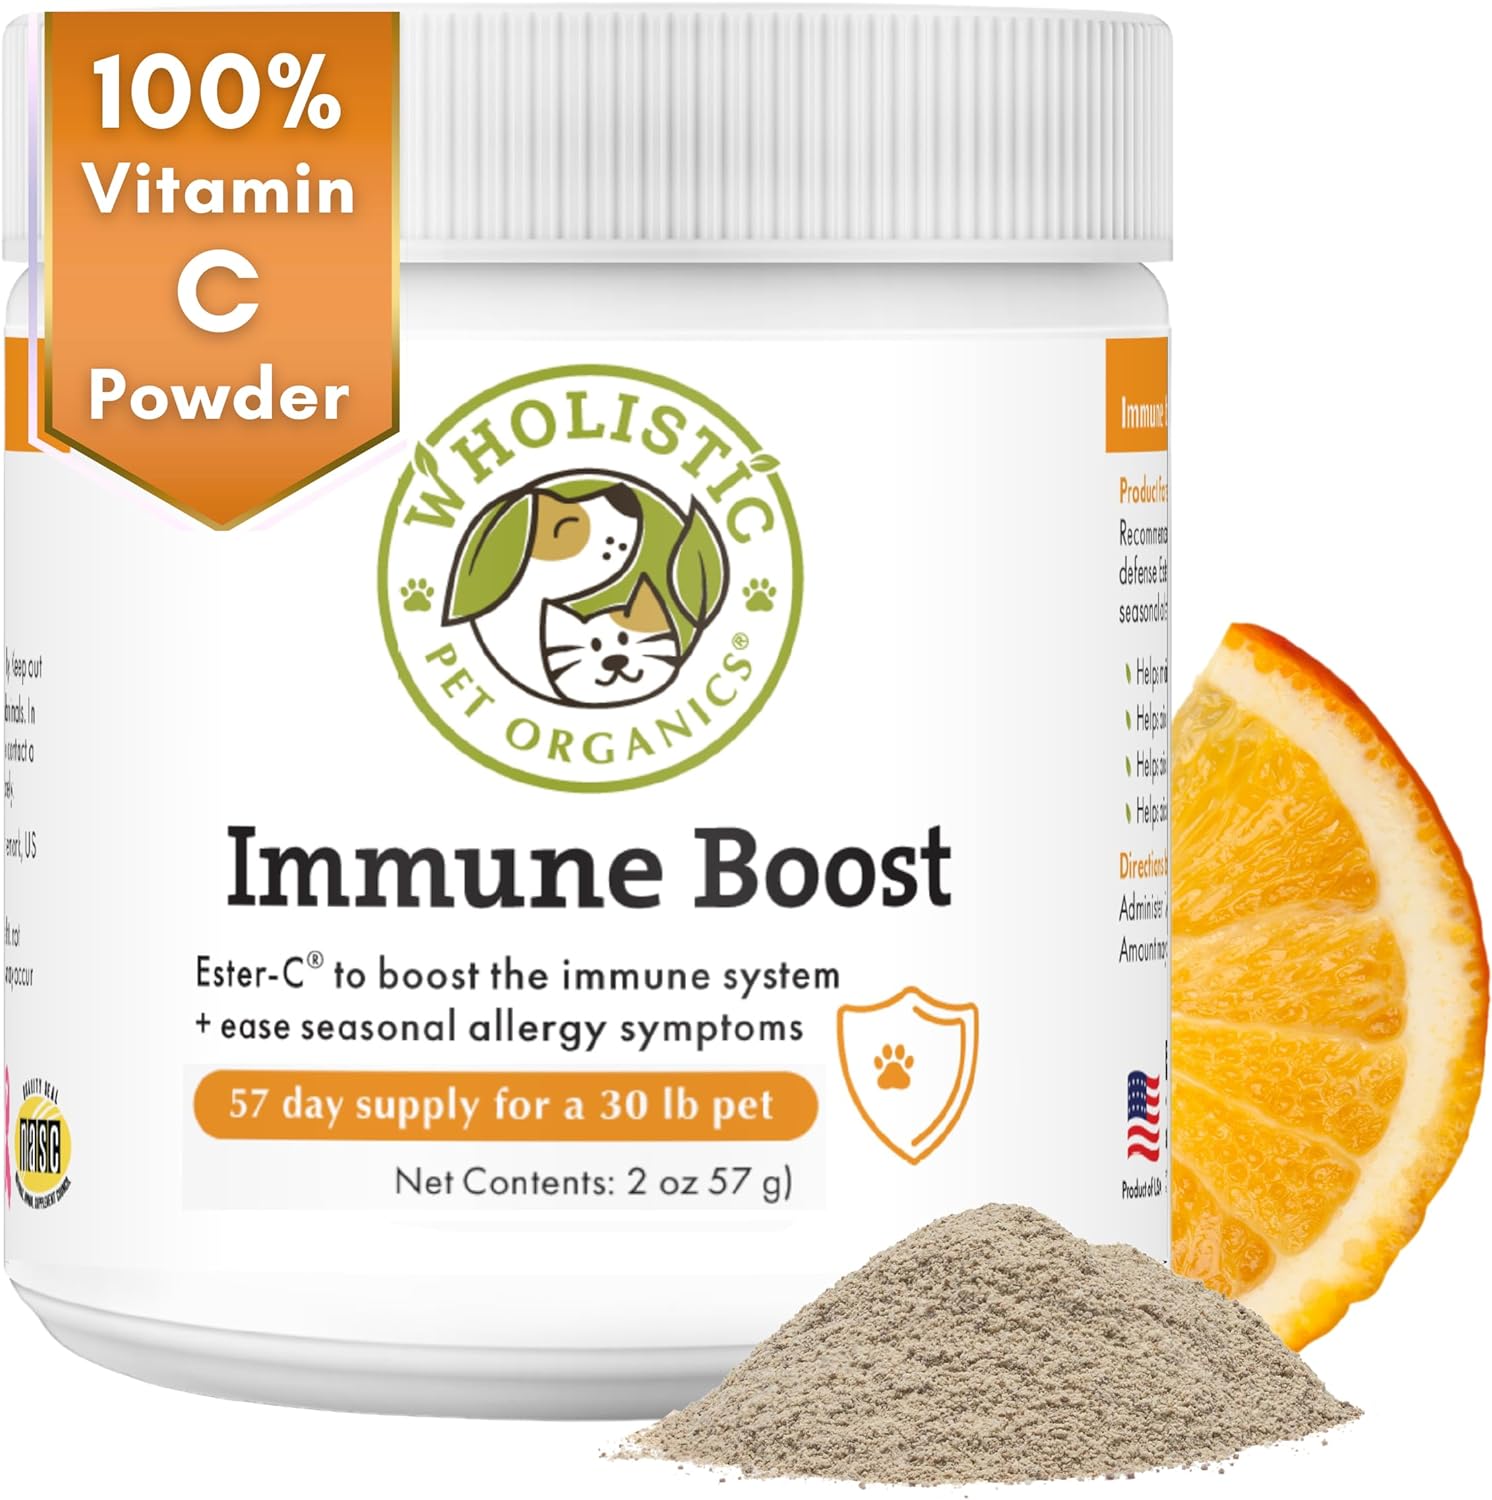 Wholistic Pet Organics Allergy Immune Boost: Vitamin C for Dogs - 2 Oz - Dog Itch Relief - Immune Support Supplement for Dog Allergy Relief Medication - Ester C Supplement for Dogs Skin and Coat